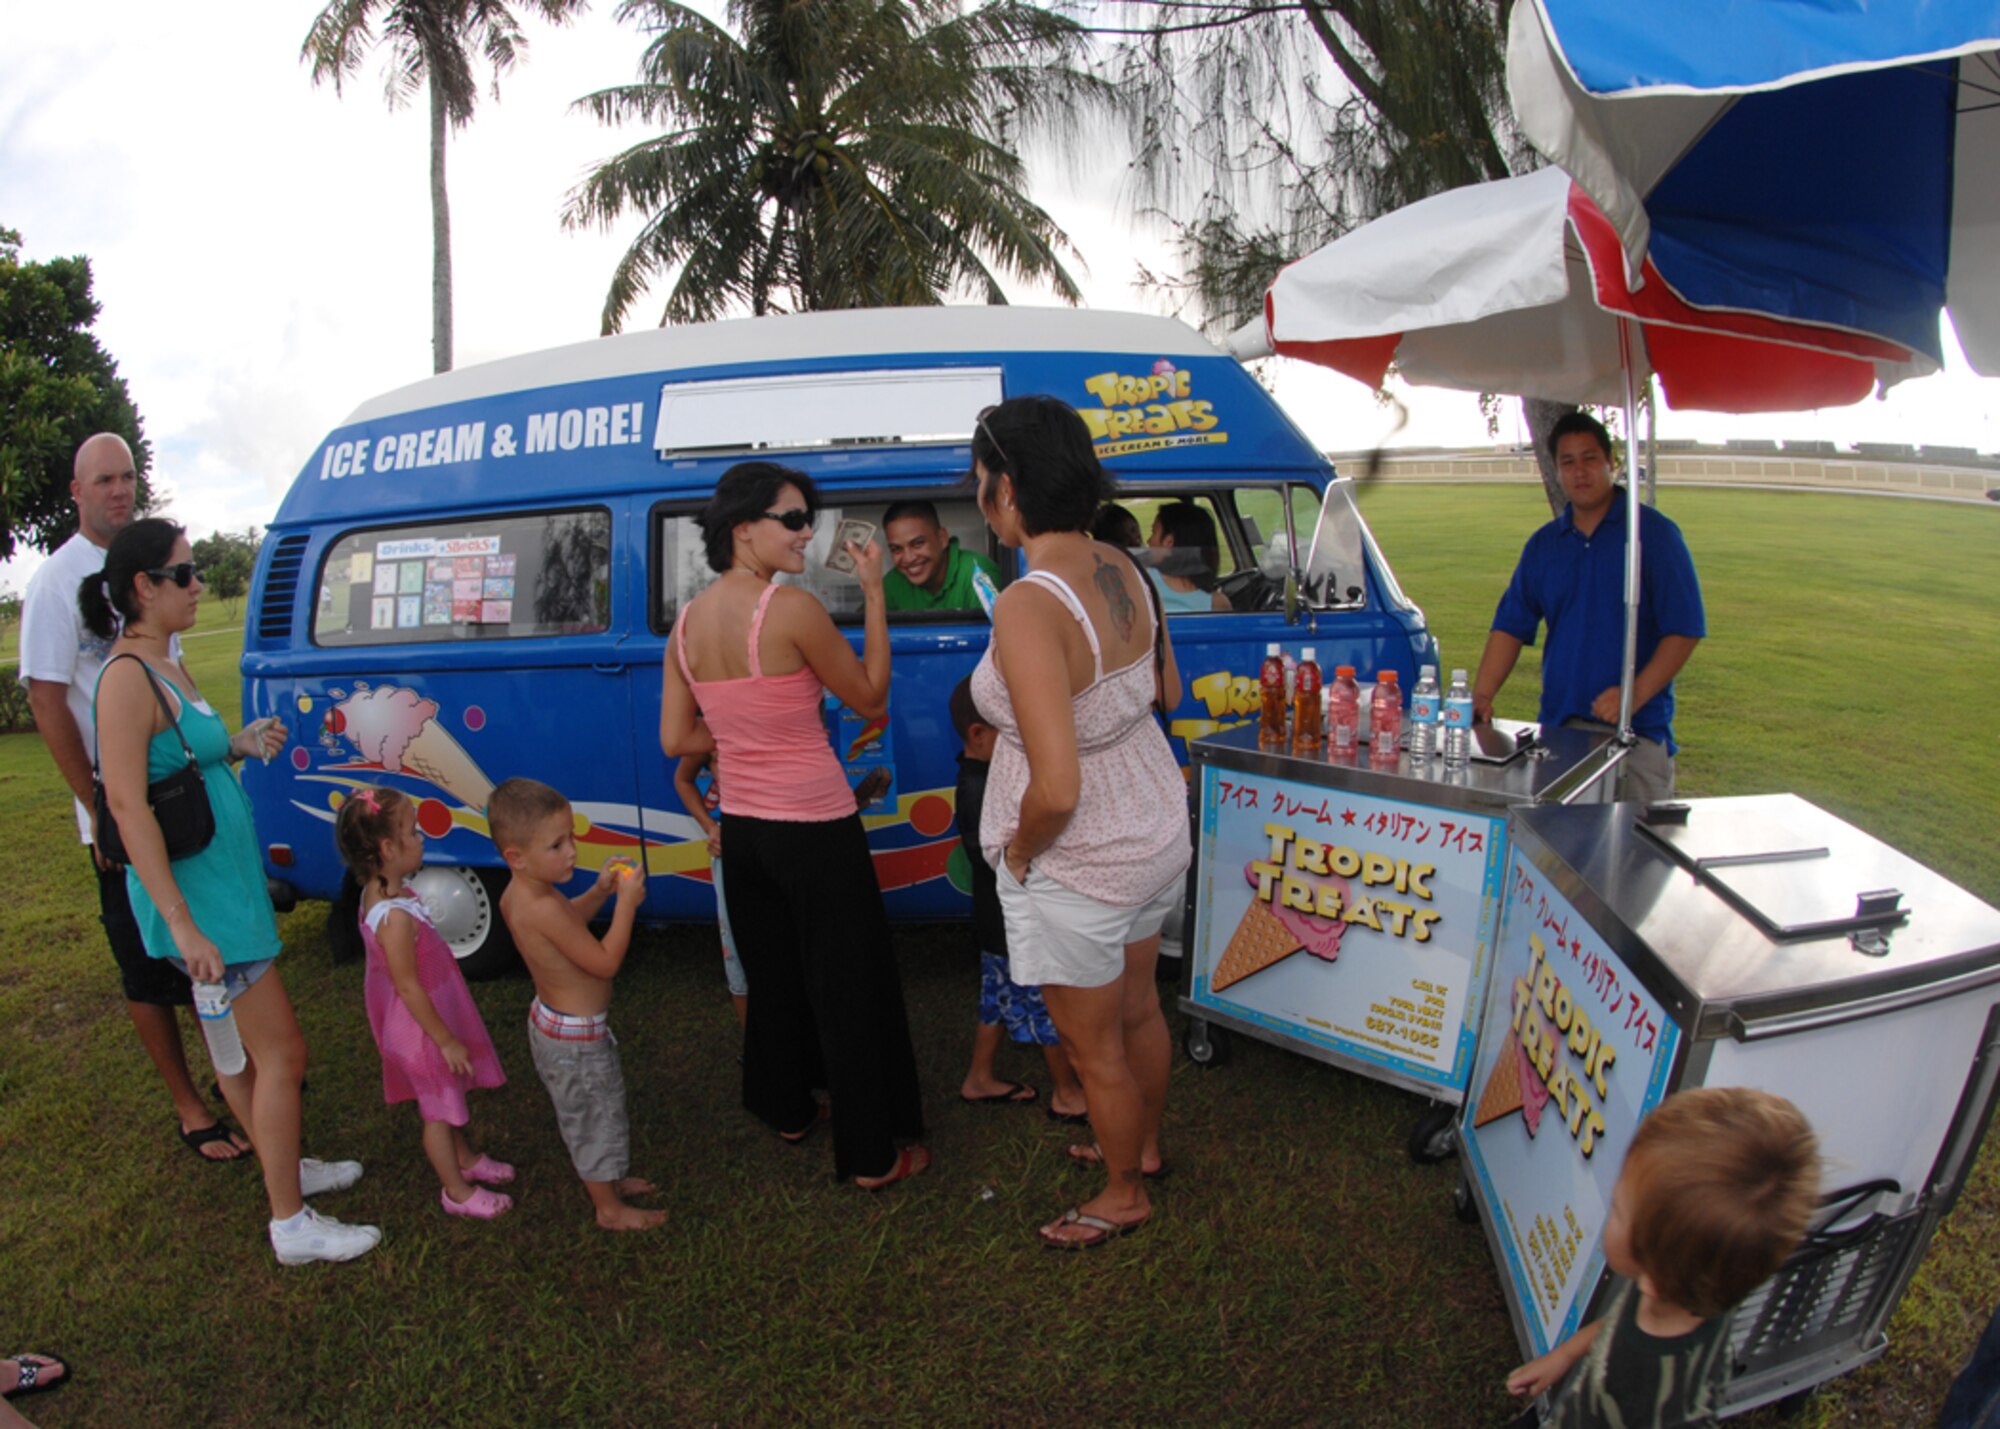 People from around the base line up to buy a frozen treat from the ice cream man during freedom fest at Arc Light Park here July 3. Freedom Fest is hosted by the 36th Force Support Squadron and held annually to recognize and celebrate our Independence Day. (U.S. Air Force photo by Airman 1st Class Nichelle Griffiths)